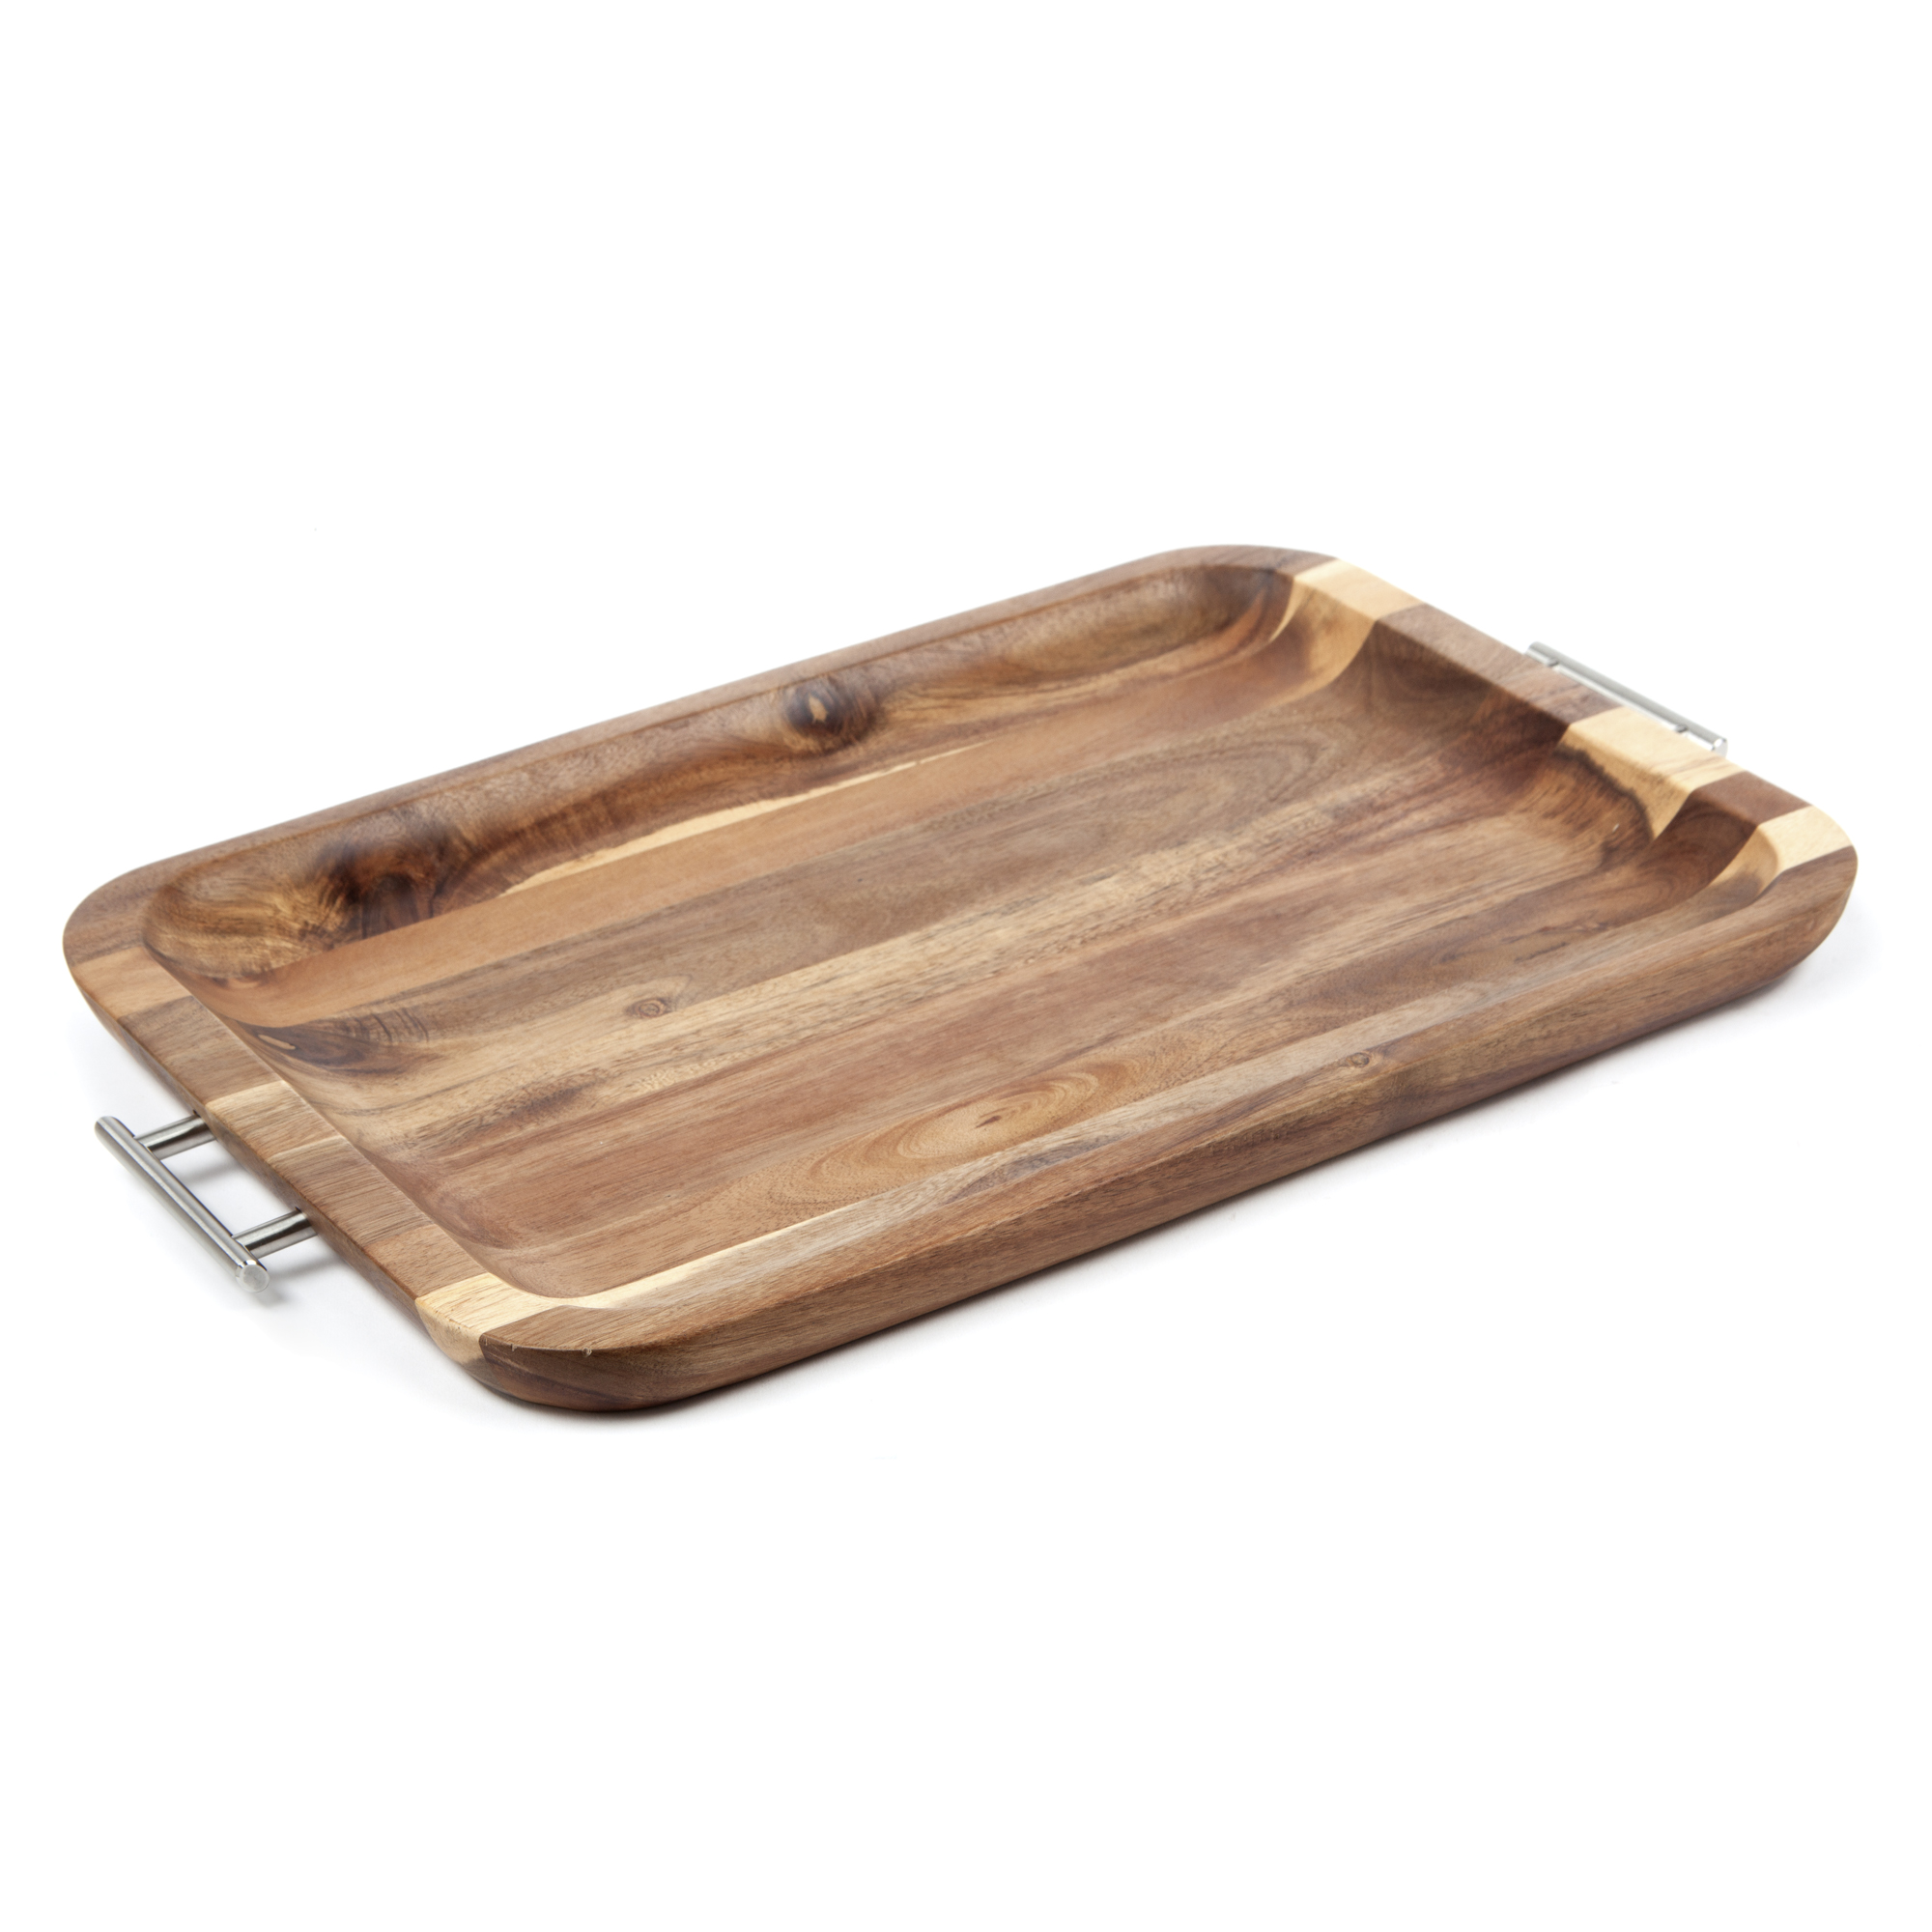 Better Homes & Gardens Acacia Wood Serving Tray with Silver Handles - image 2 of 4